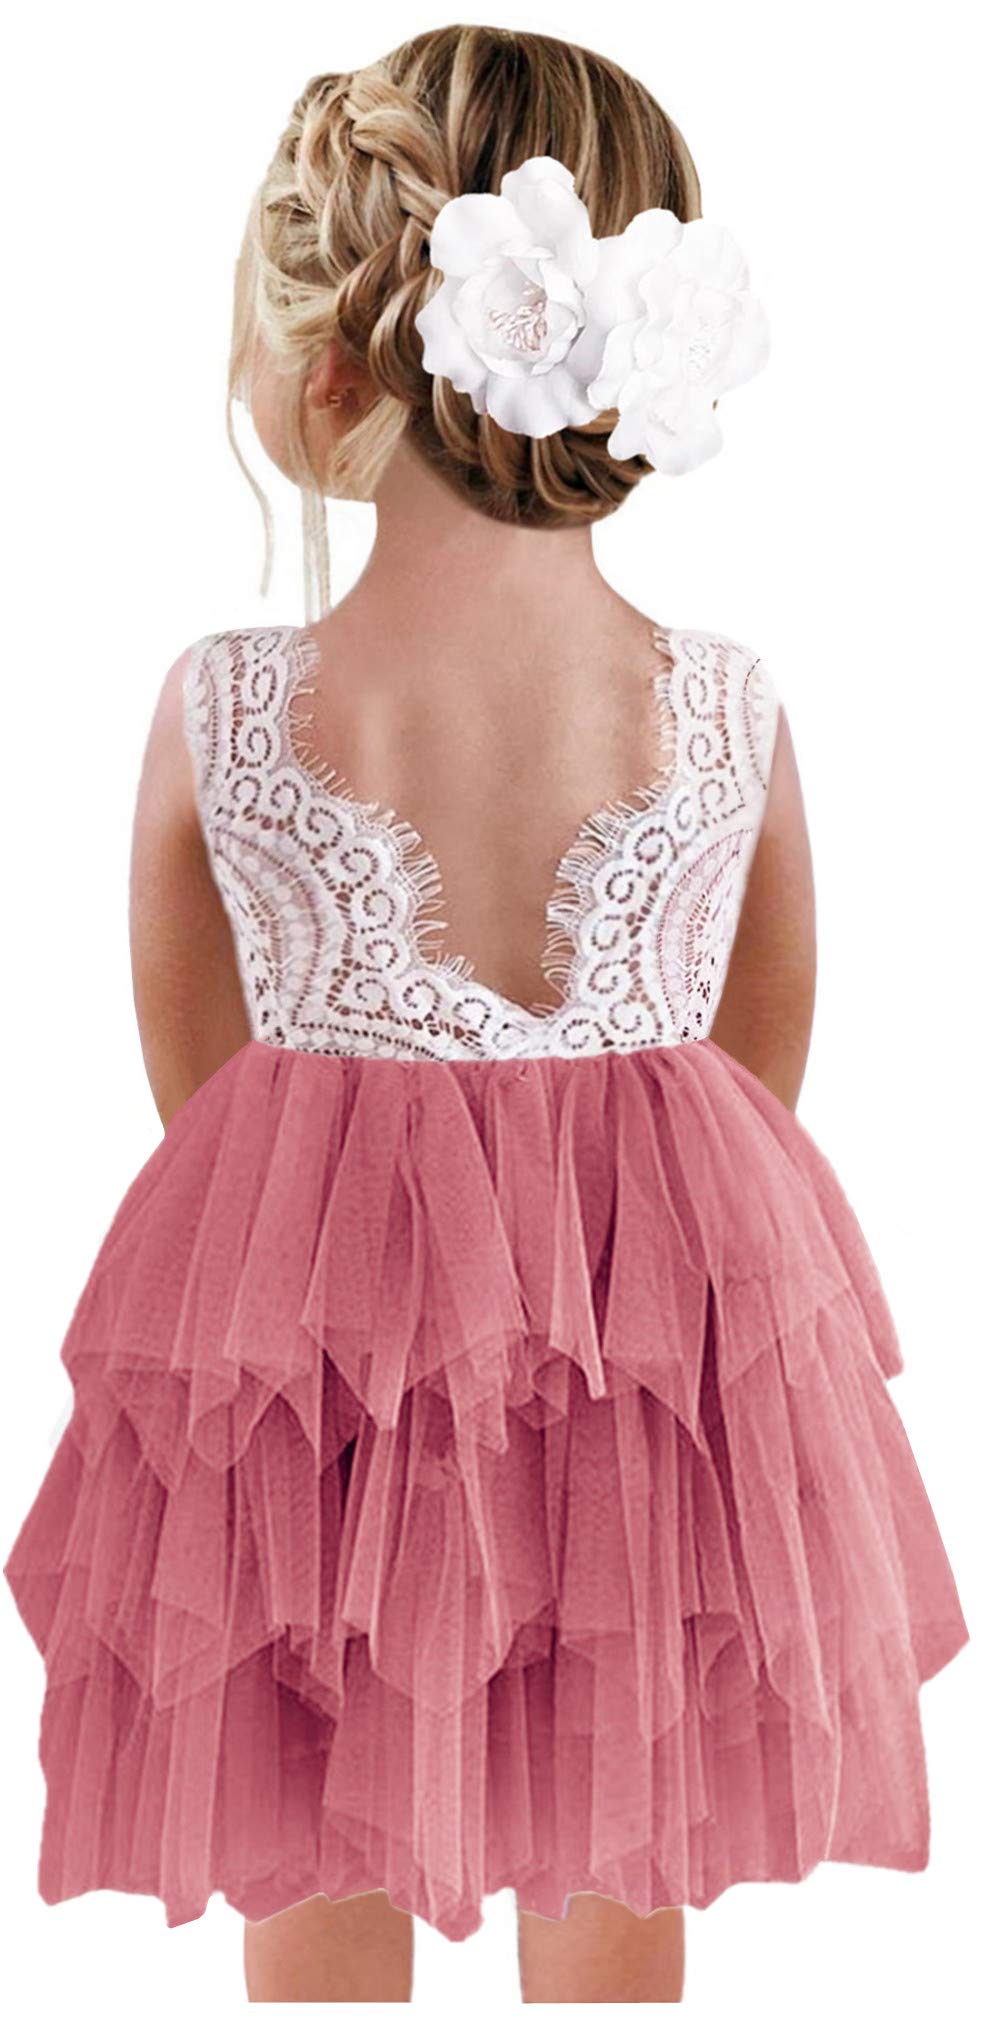 2Bunnies Girl Peony Lace Back A-Line Tiered Tutu Tulle Flower Girl Dress (Dusty Rose Sleeveless Short, 7-8YRS)